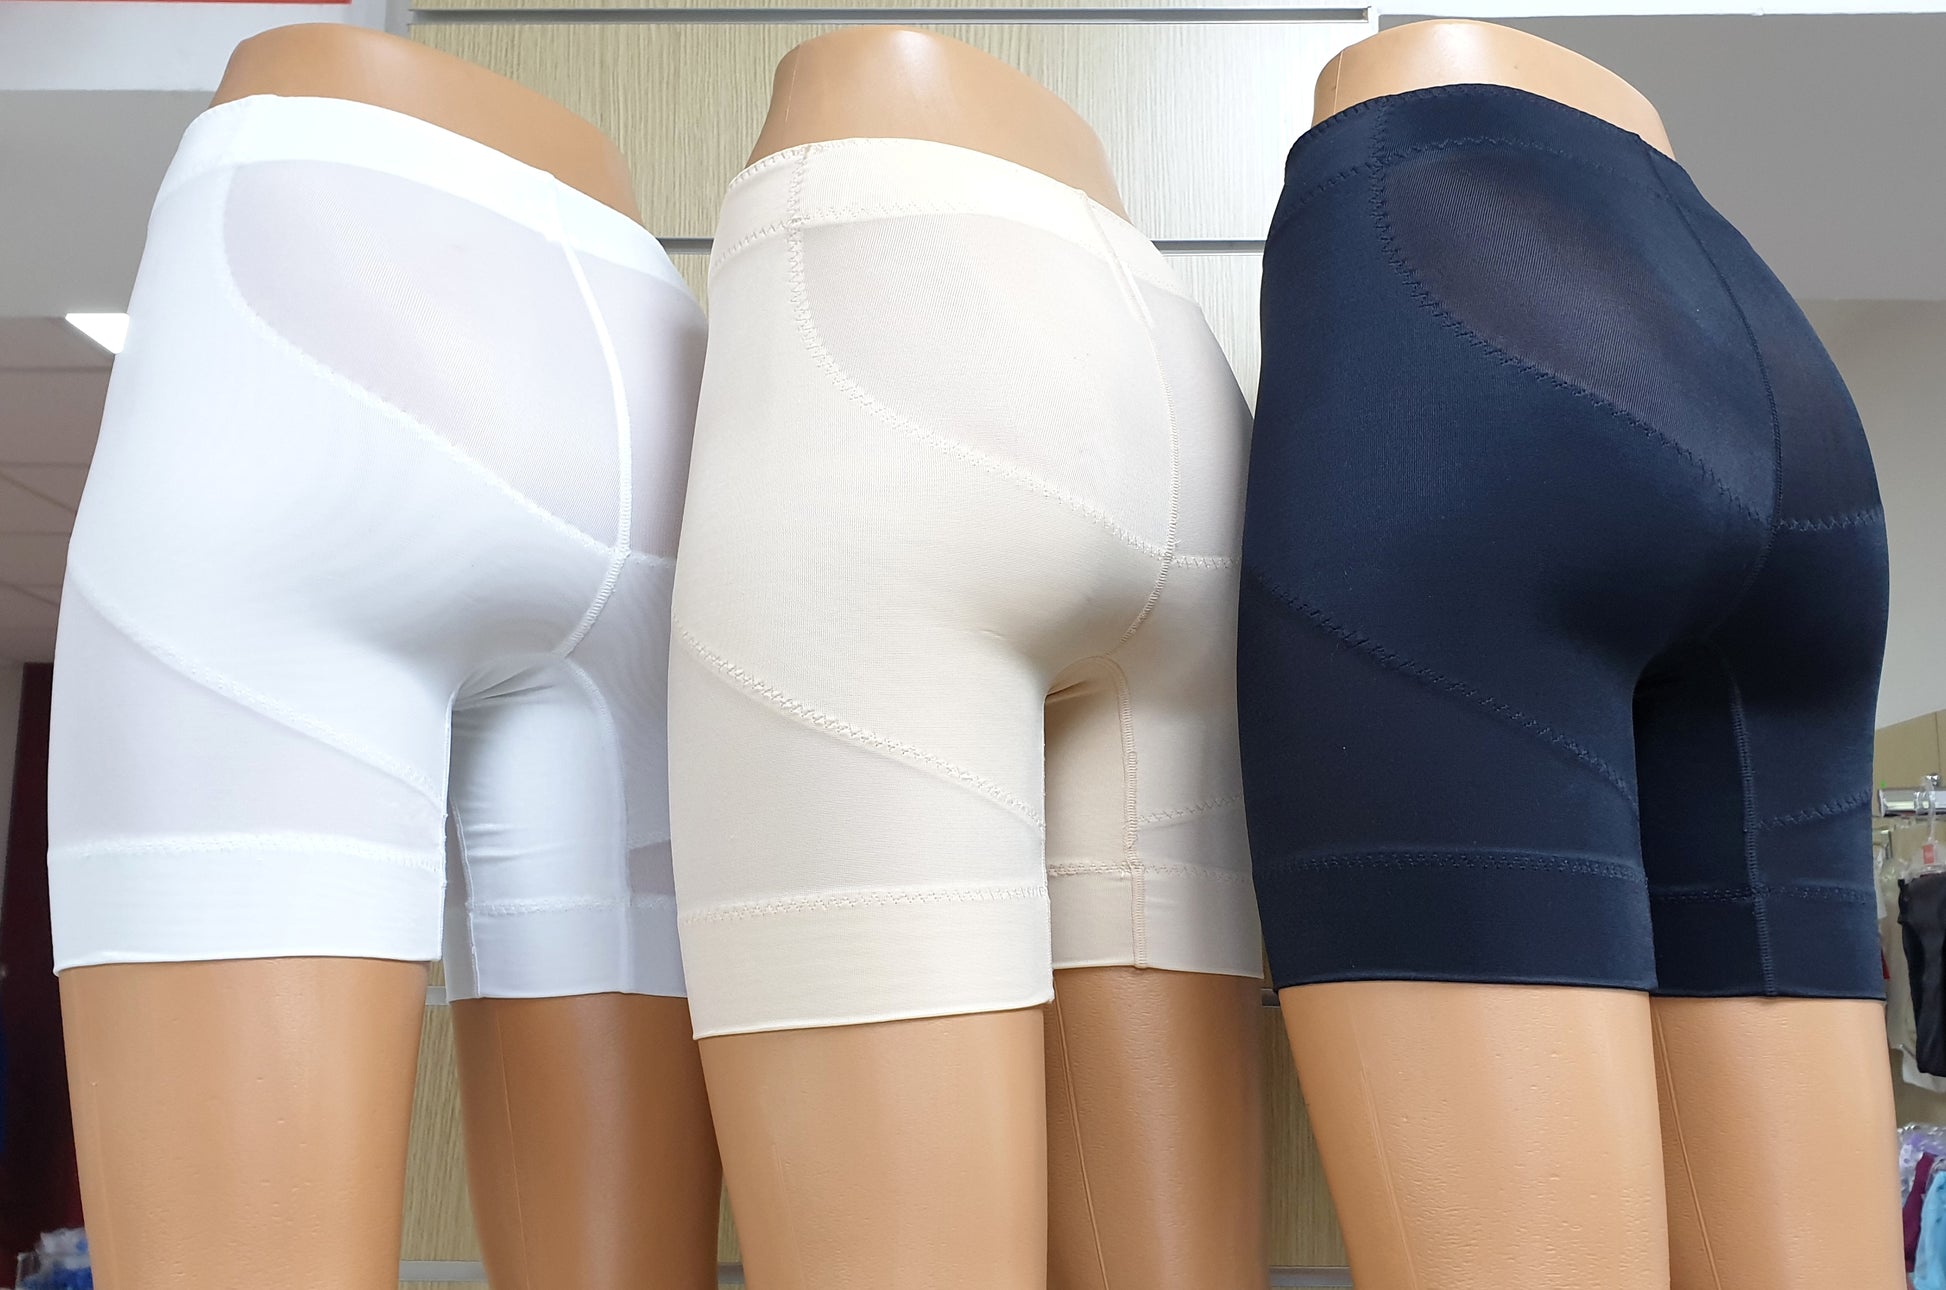 Shaping and control shorts from the Classic line by Lepel from Italy